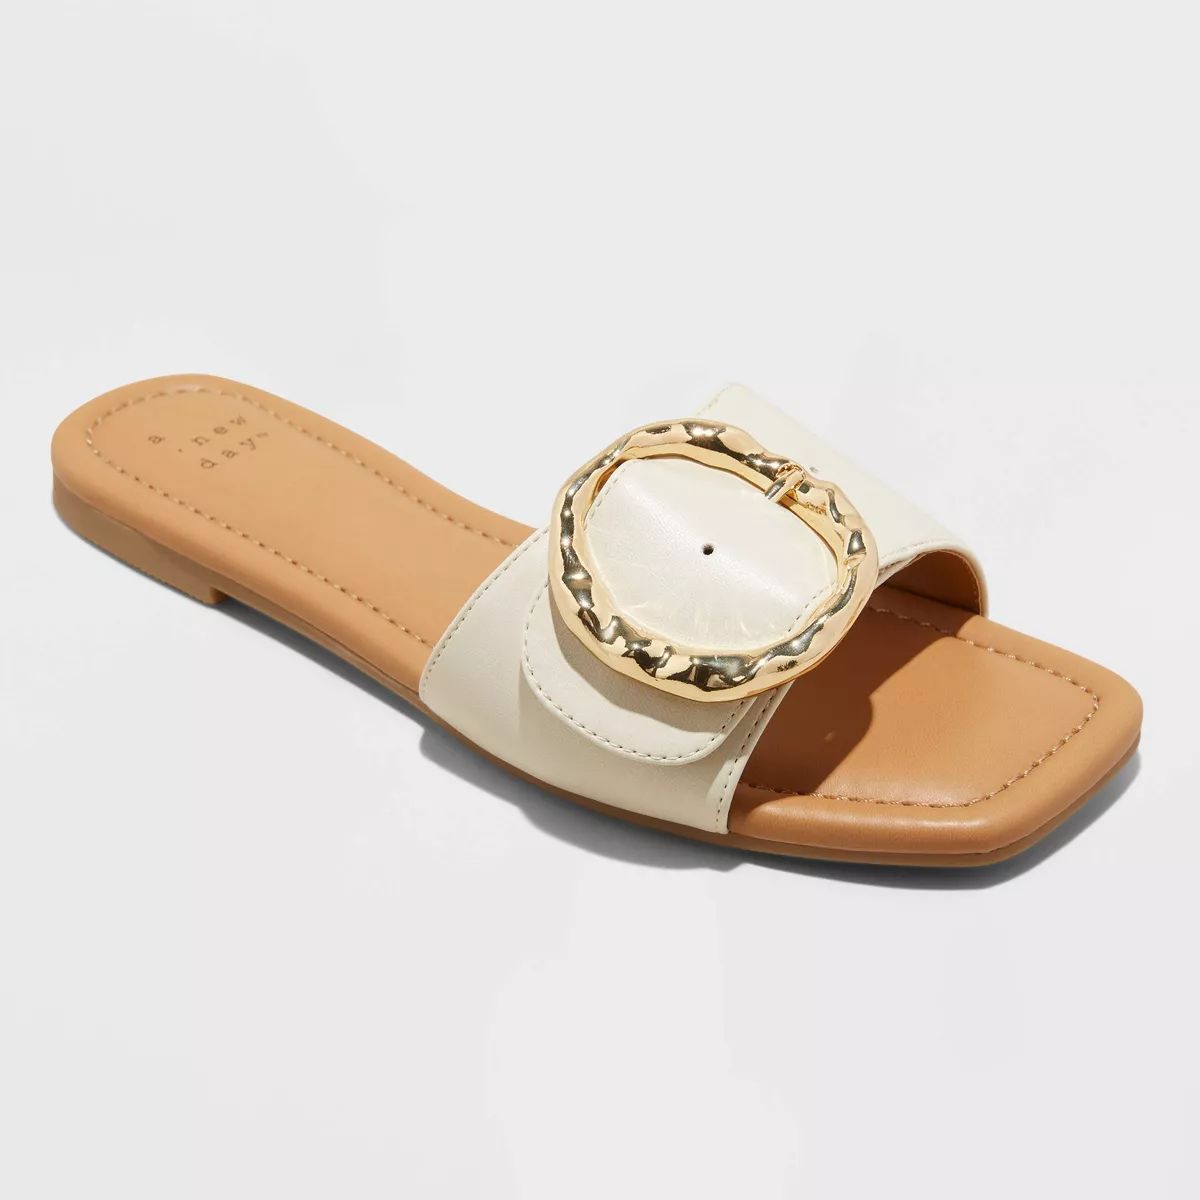 Women's Bennie Buckle Slide Sandals with Memory Foam Insole - A New Day™ Cream 9 | Target